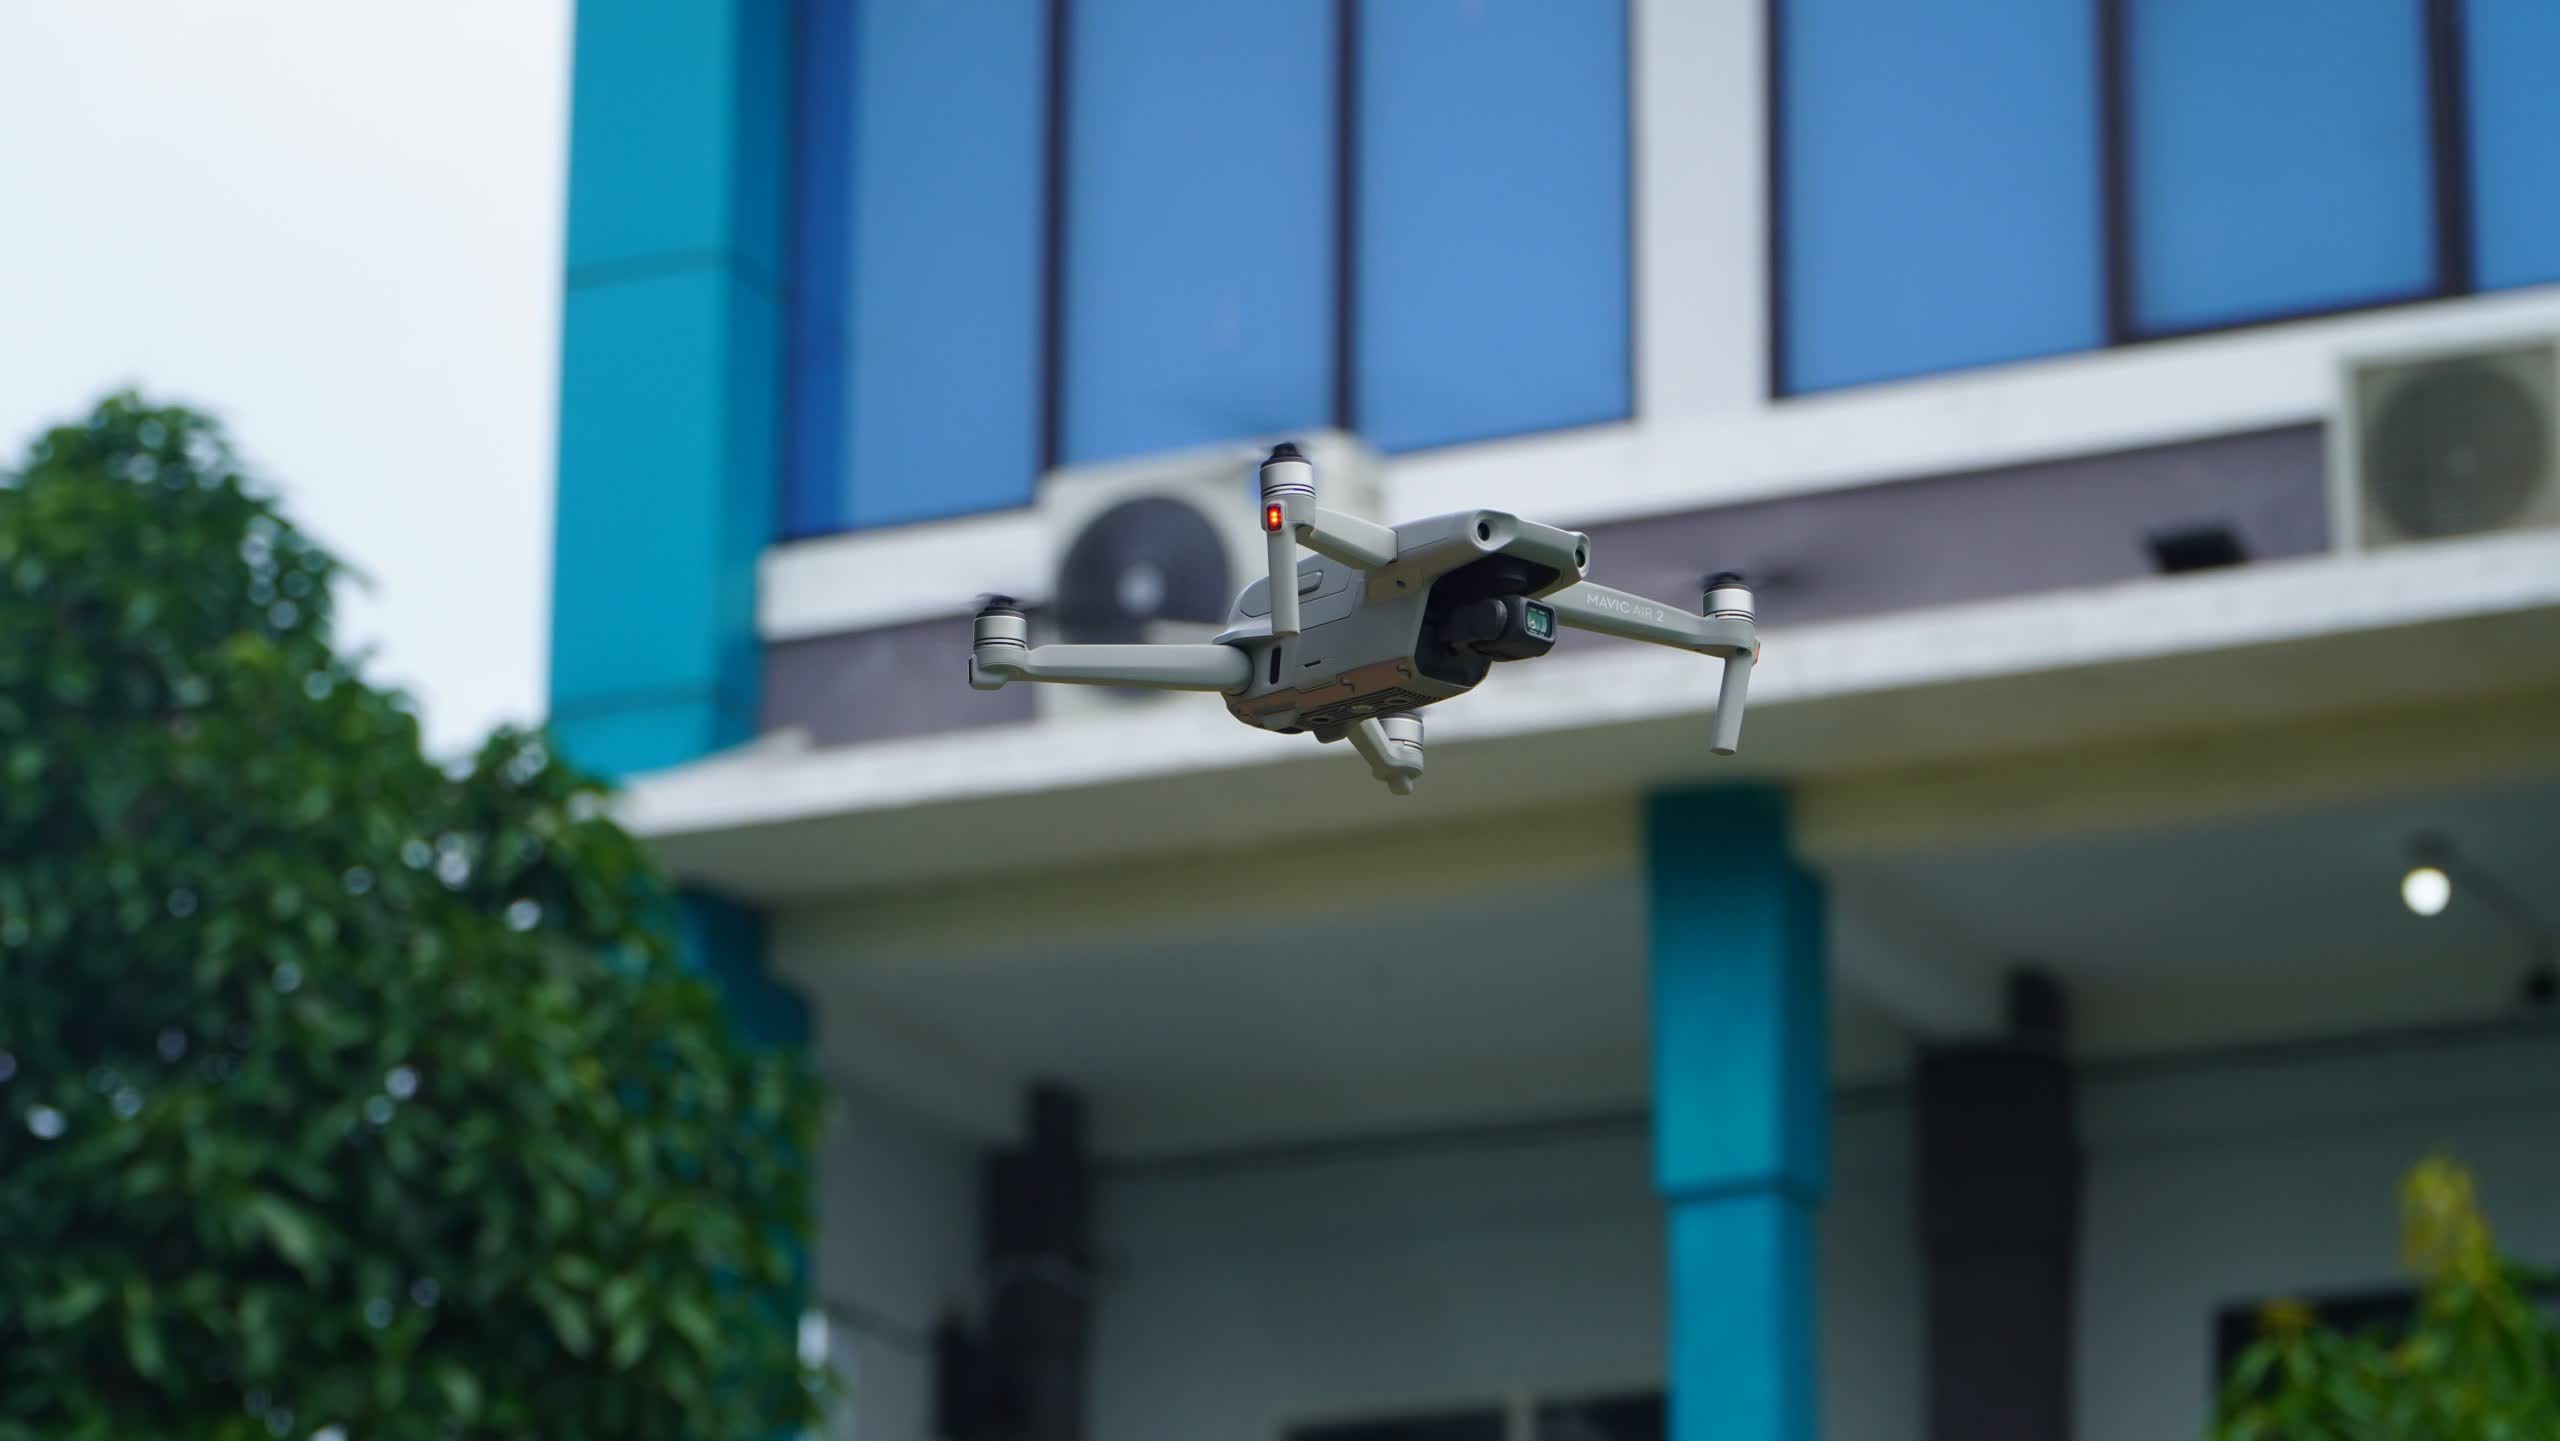 Wi-Fi drones were used by hackers to penetrate a financial firm's network remotely